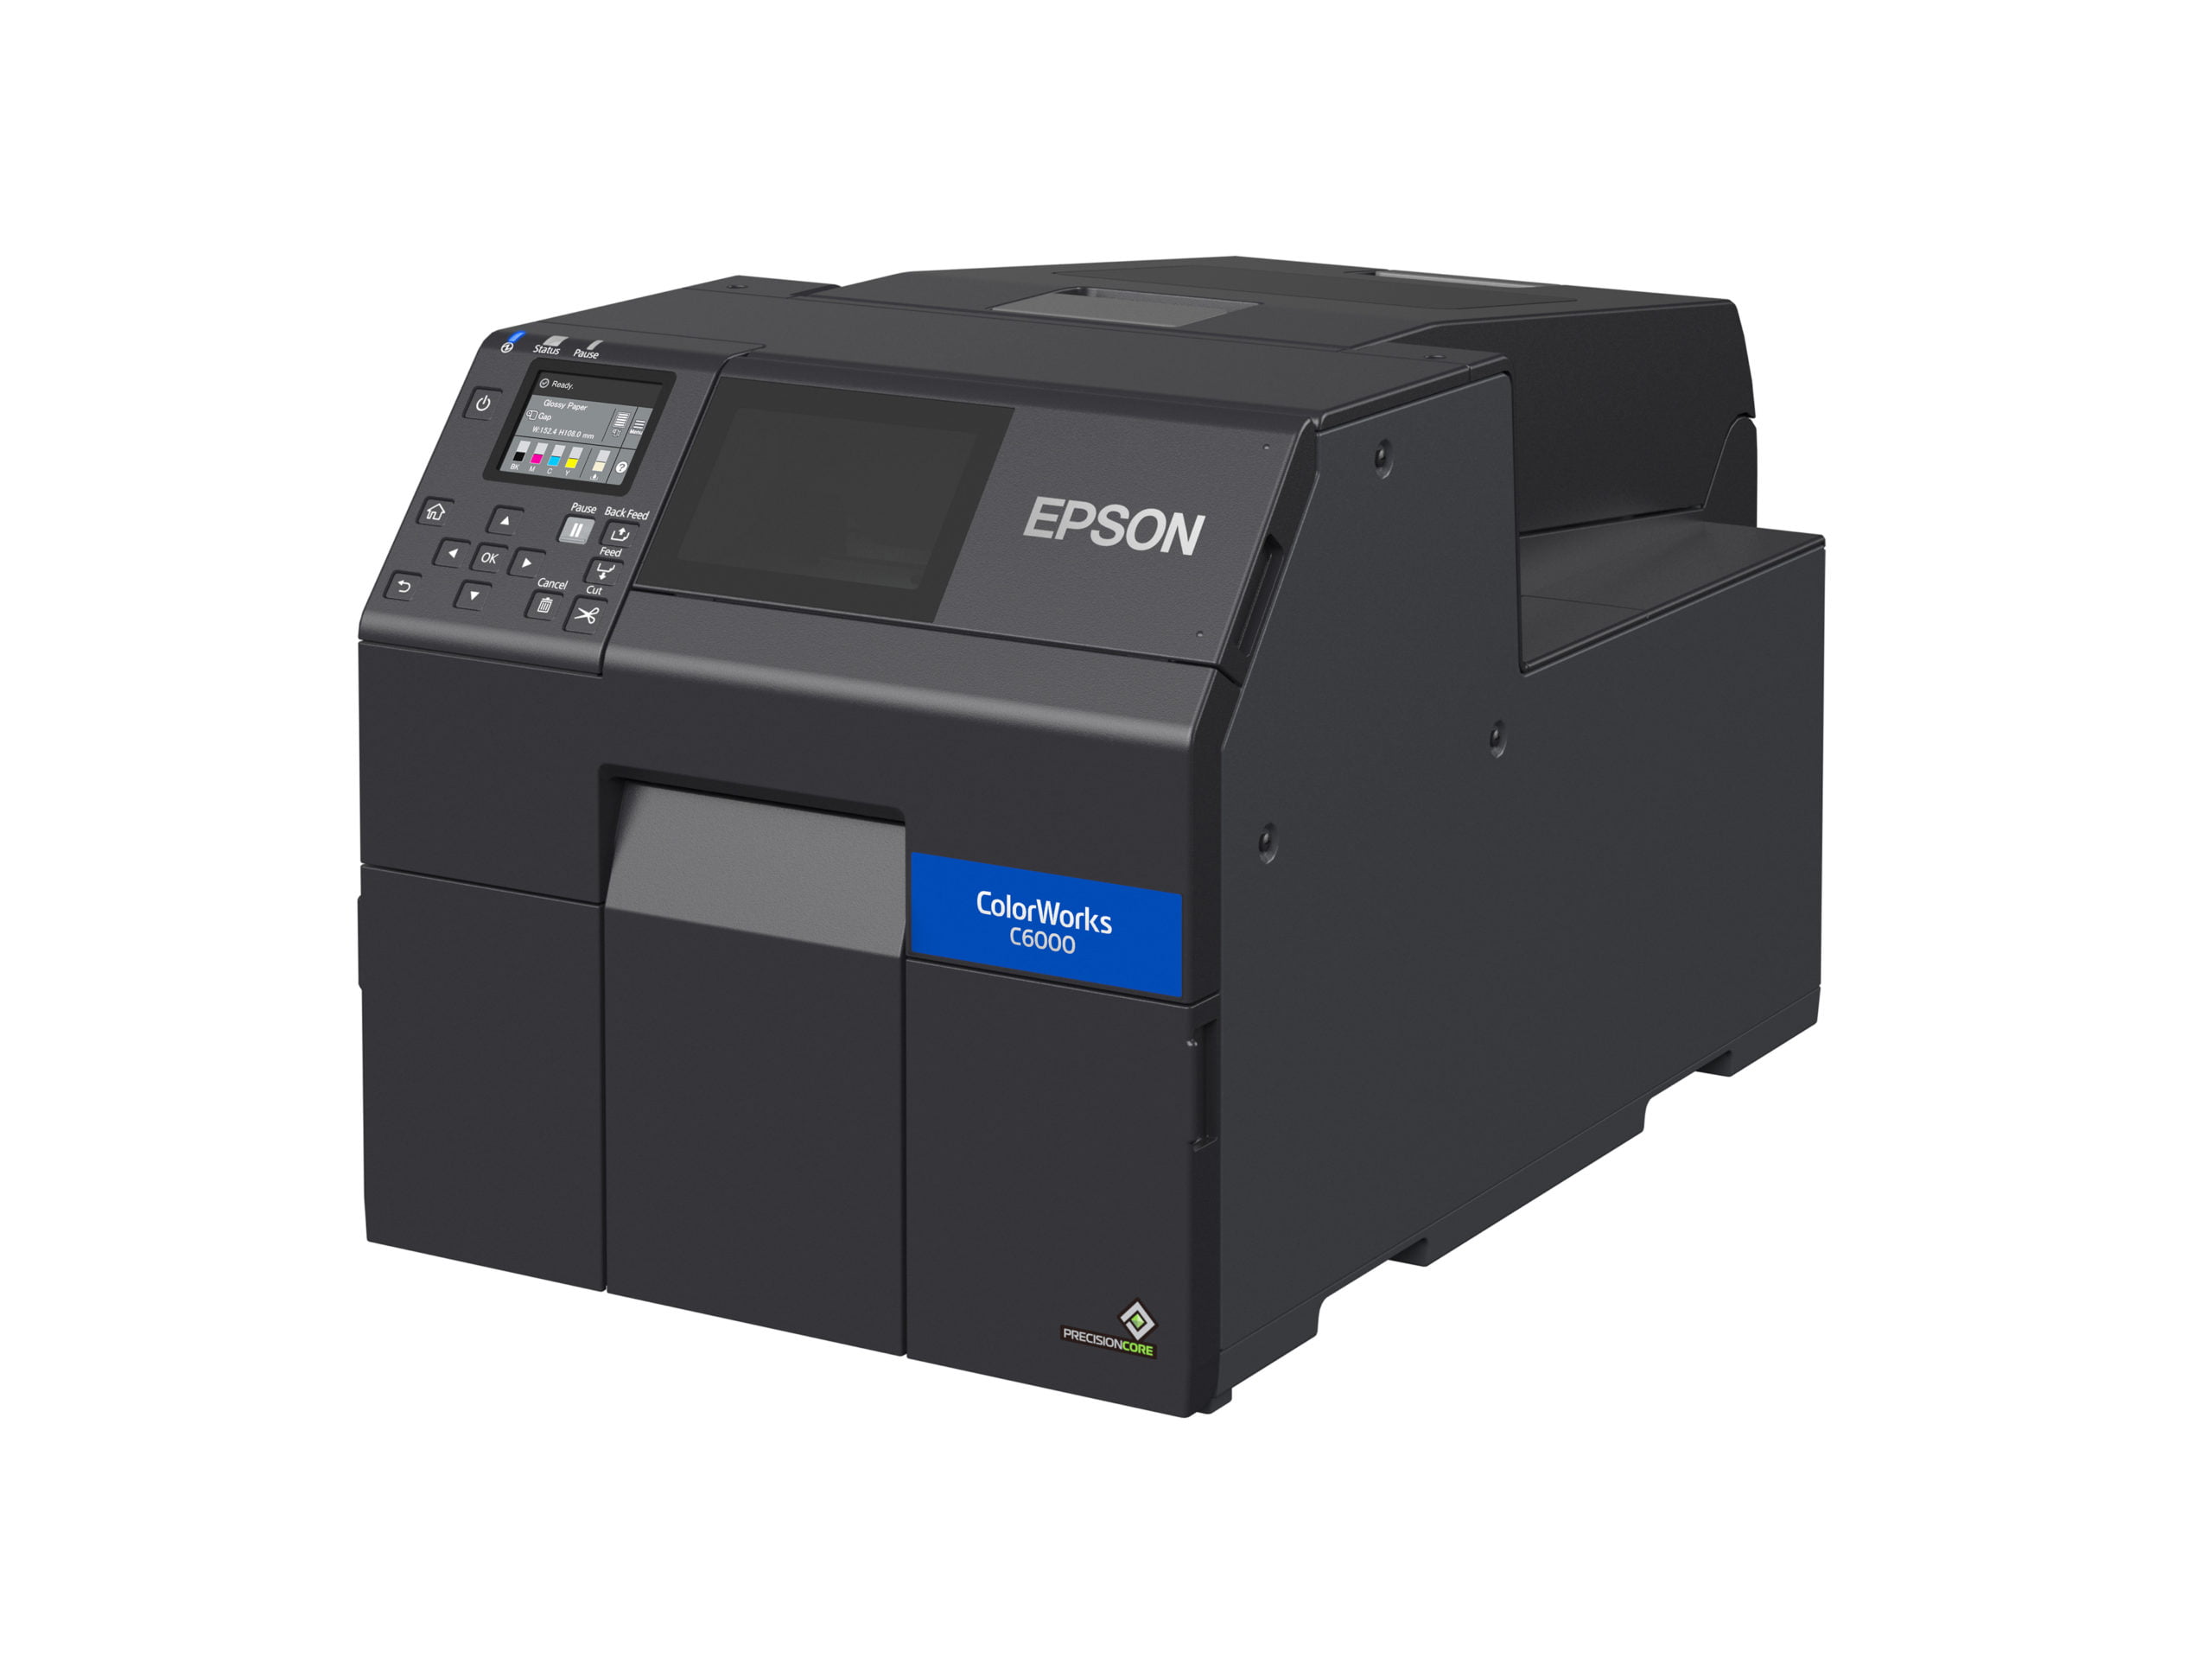 Epson ColorWorks C6000A is a popular gloss color label printer